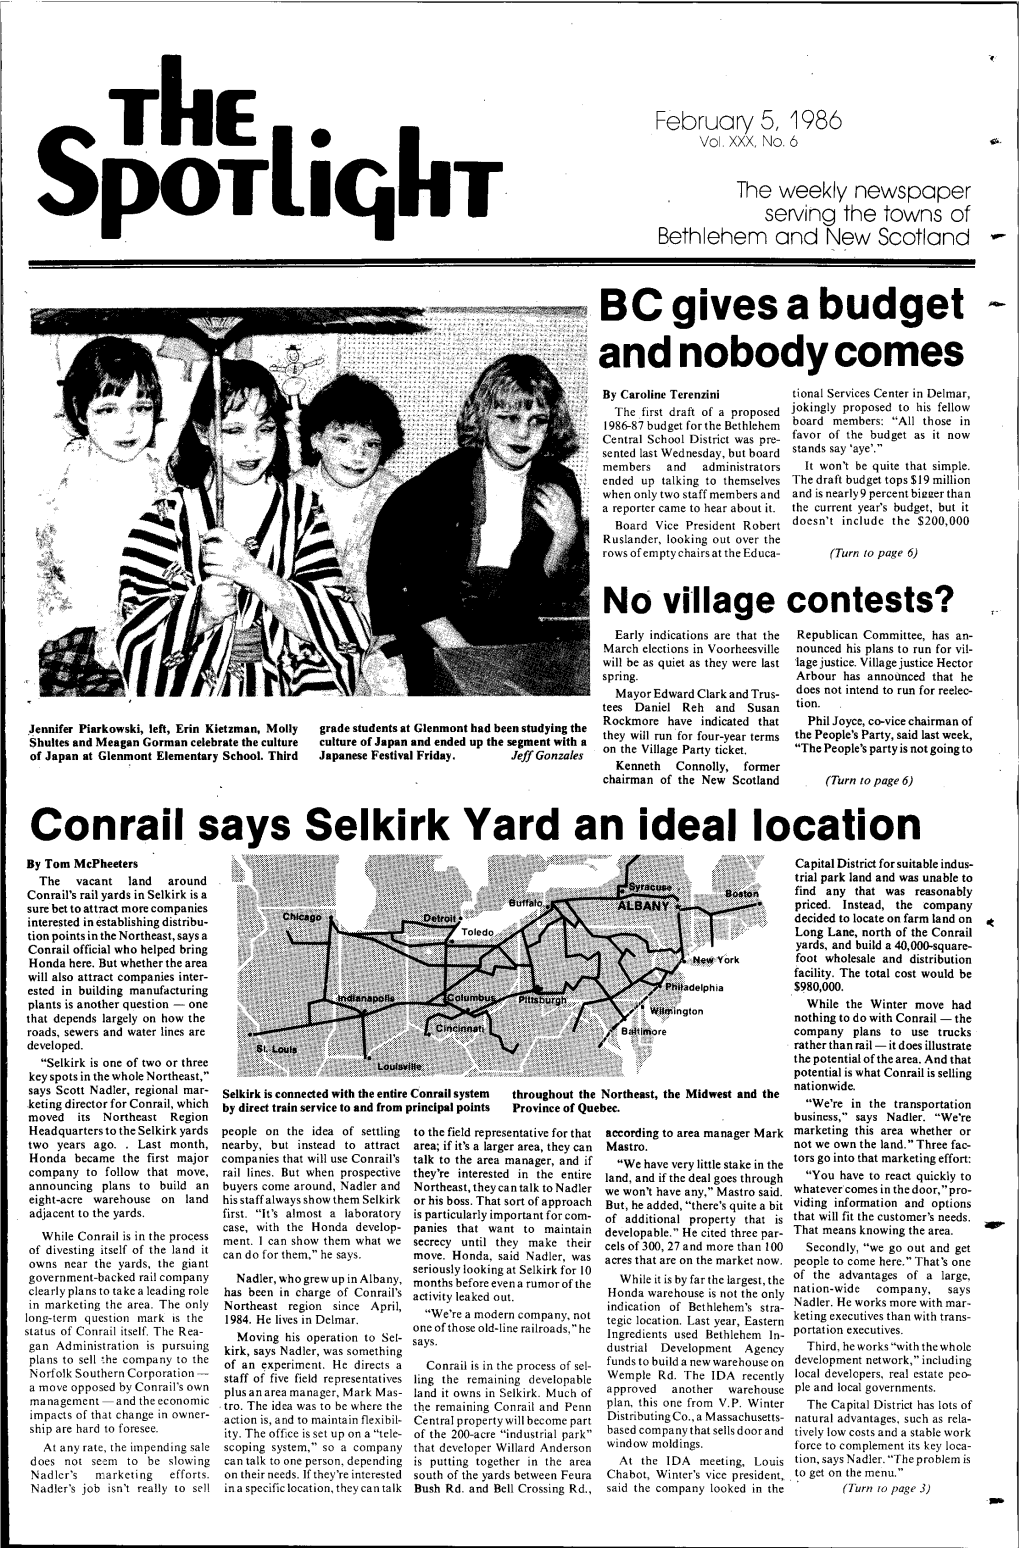 BC Gives a Budget and Nobody Comes Conrail Says Selkirk Yard an Ideal